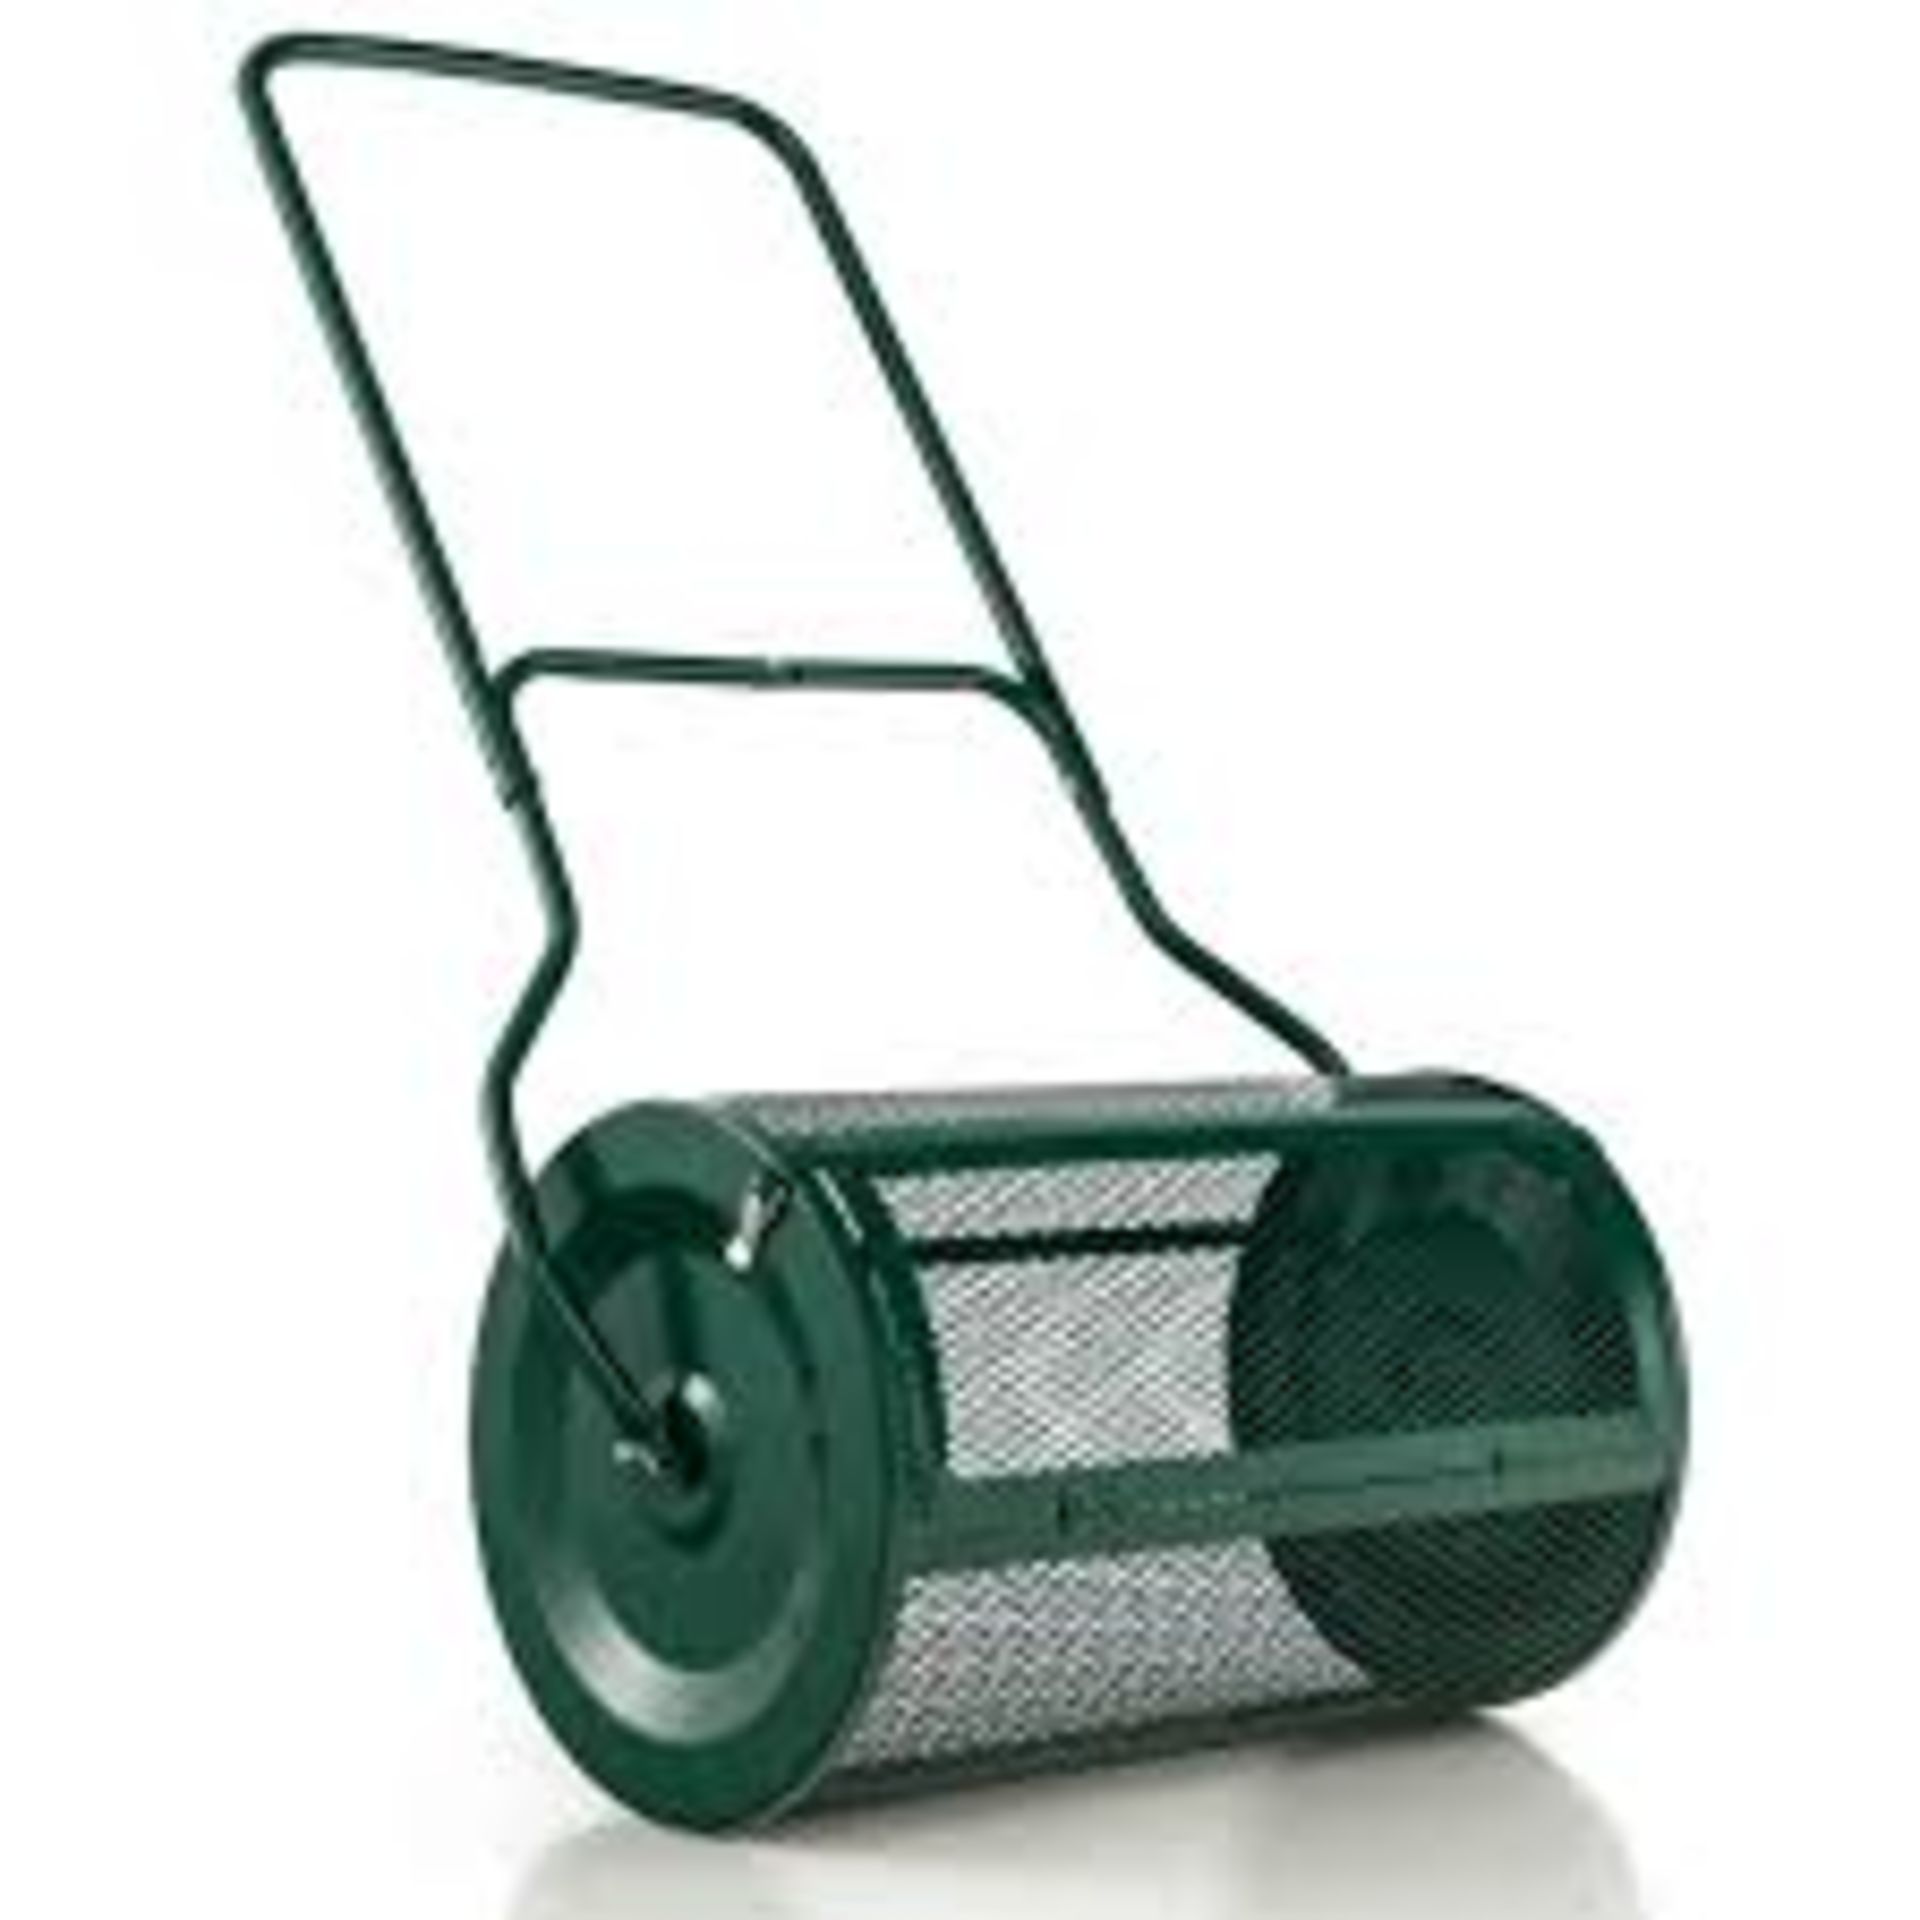 27 Inch Compost Spreader with Upgrade U-shaped Handle-Green . - R13a.4.